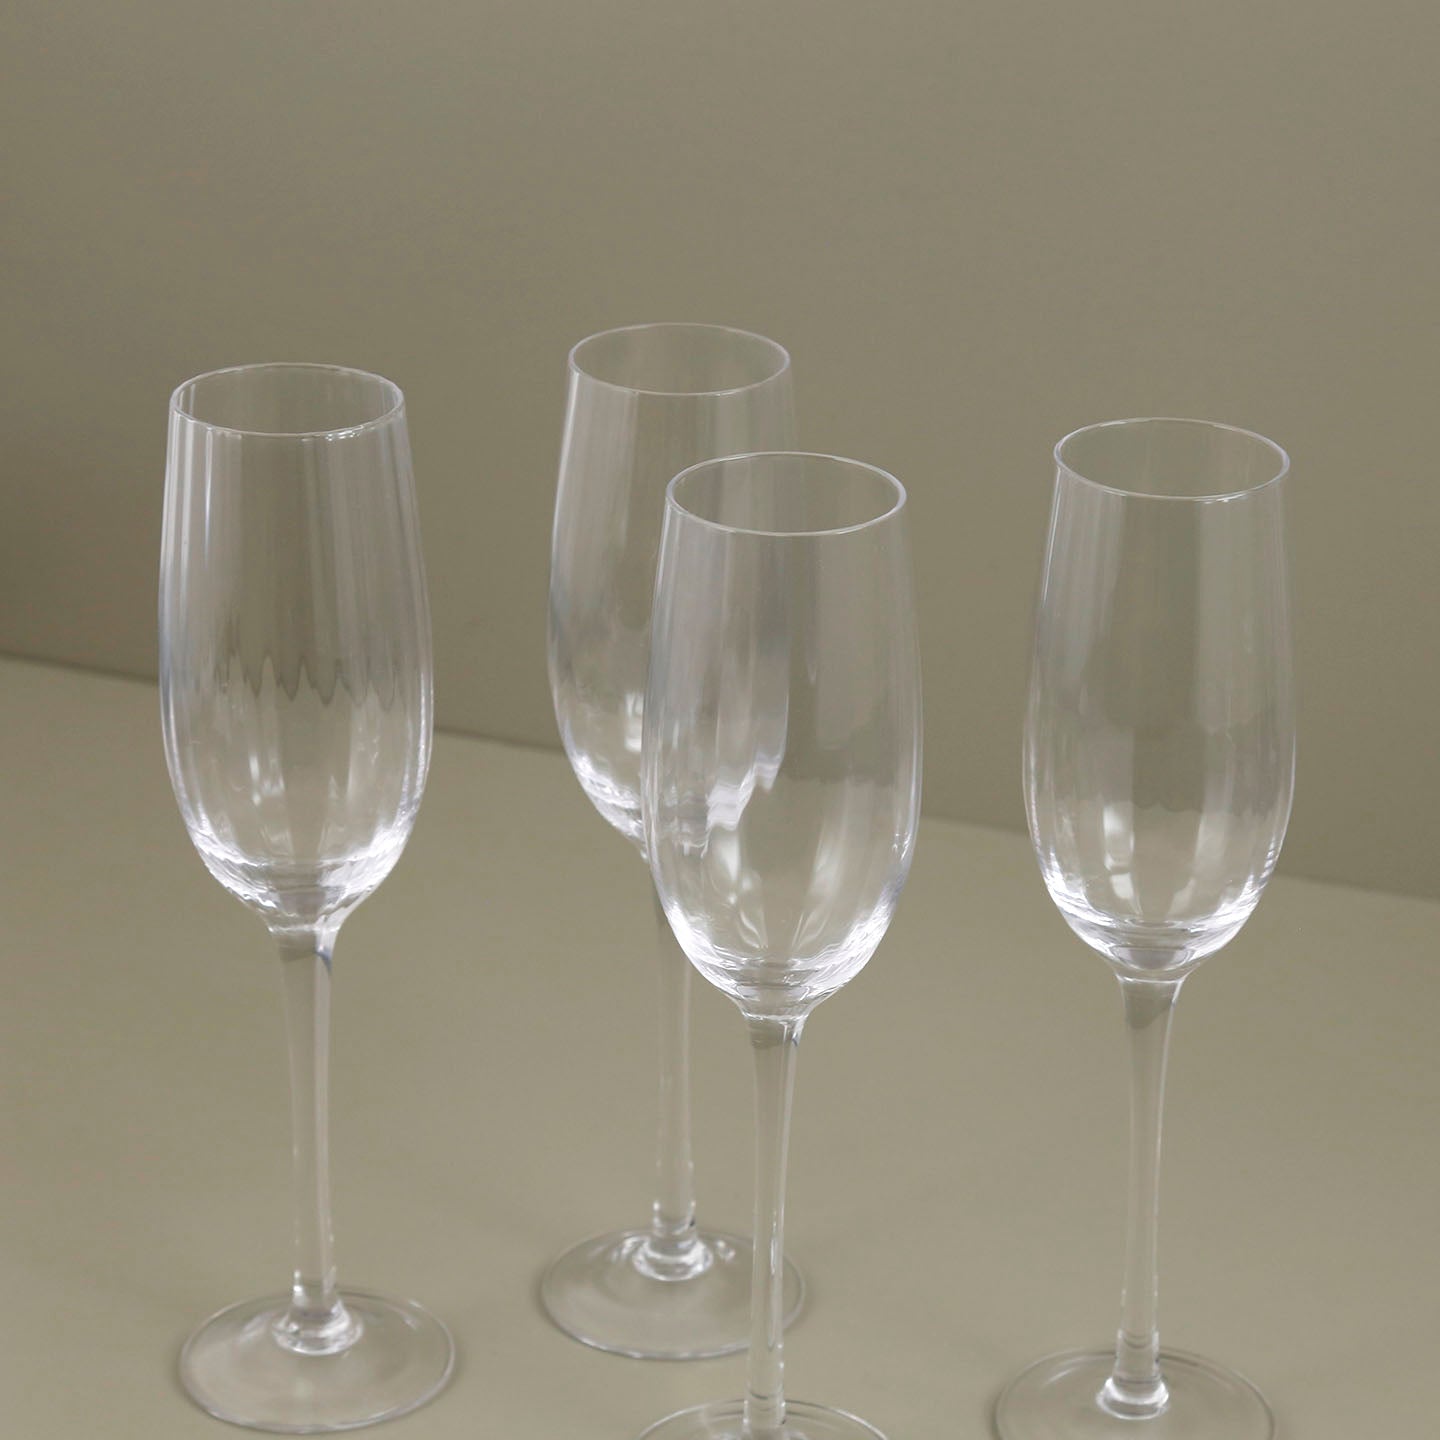 Beneti Glassware 11 Ounce Champagne, Glasses Set Of Four (4)